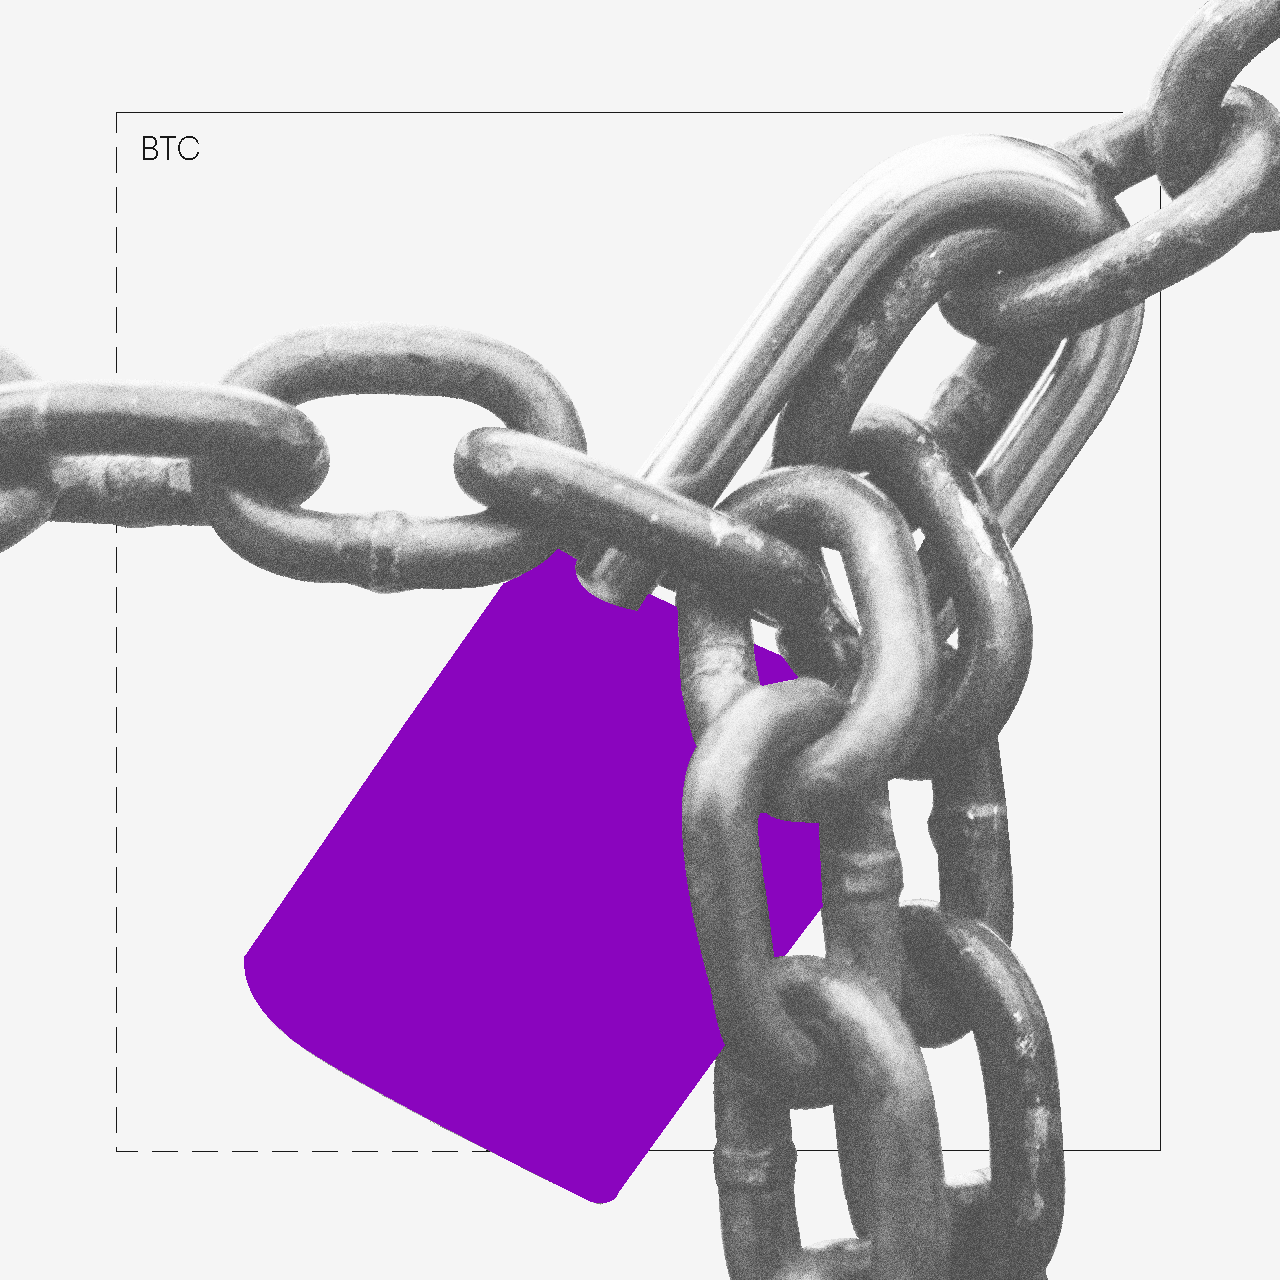 https://backend.blog.nubank.com.br/wp-content/uploads/2020/09/golpe-do-inss-square.png?quality=100